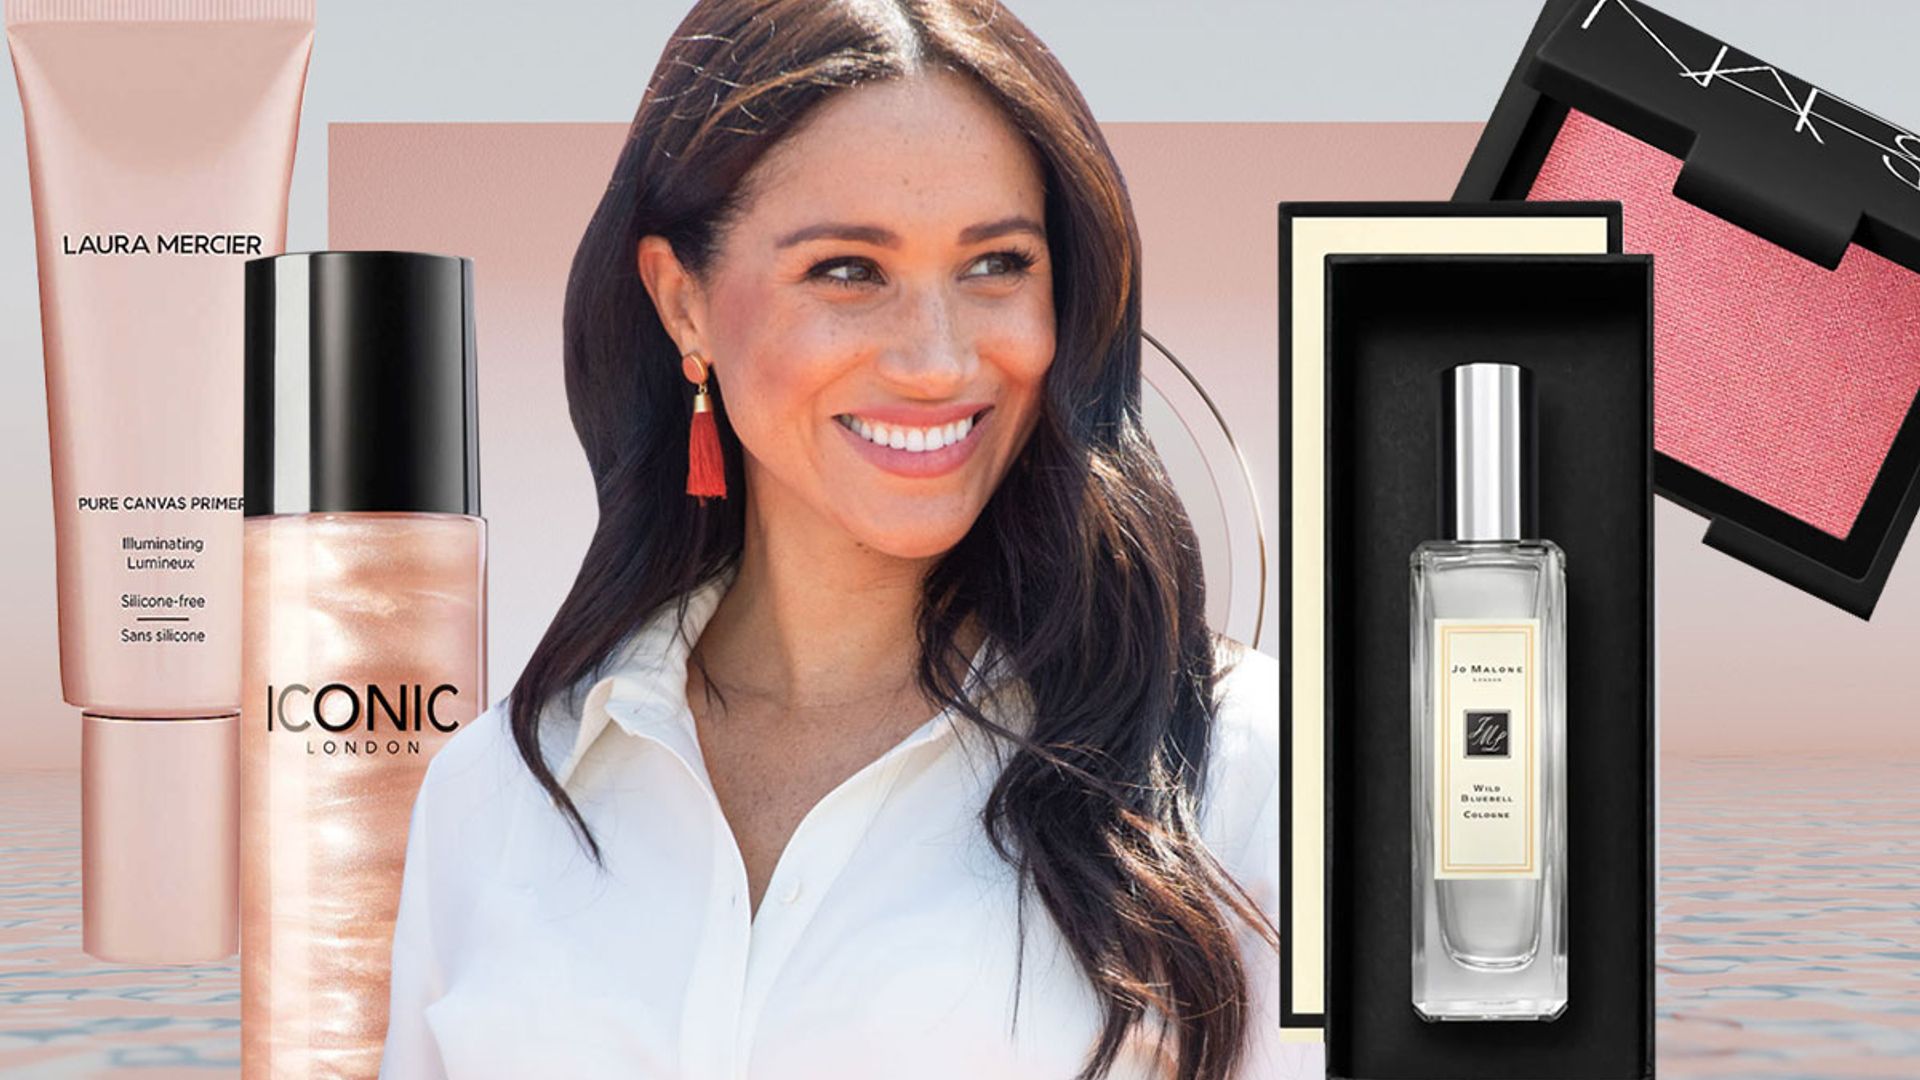 Meghan Markle's beauty products: Makeup, skincare and hair care! HELLO!